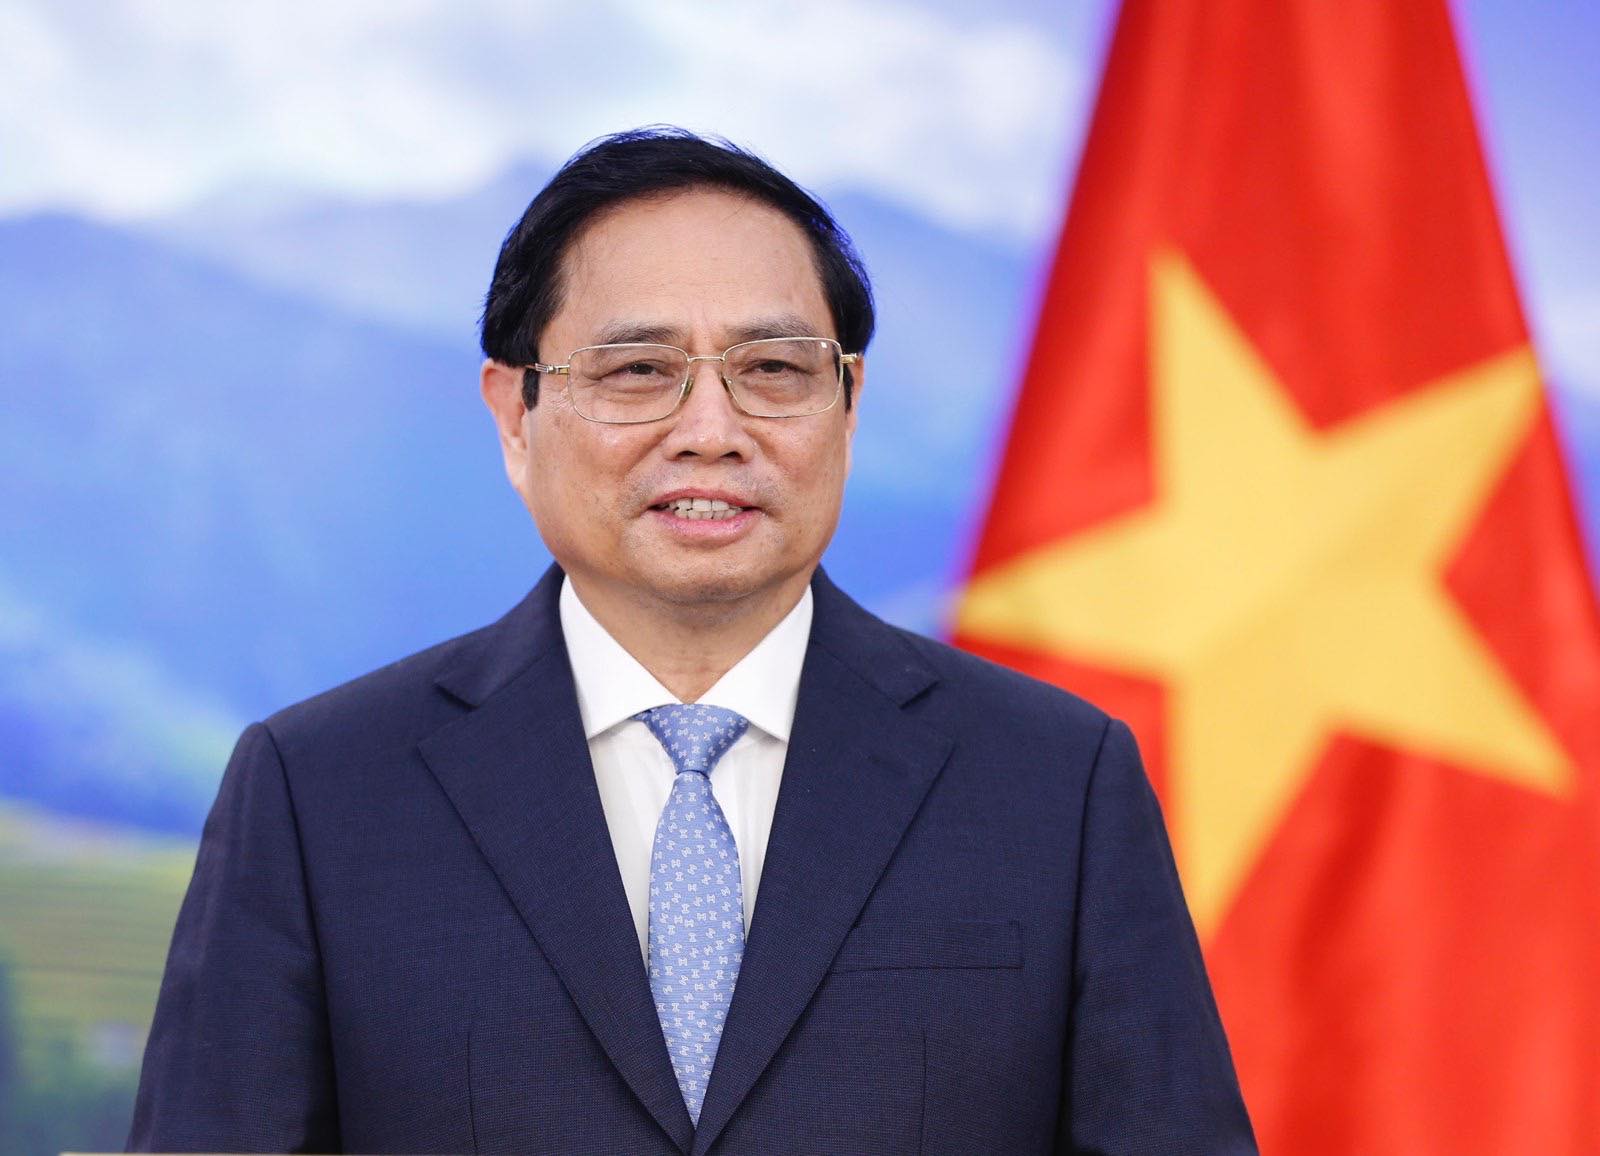 What are the duties and powers of the Prime Minister of Vietnam?